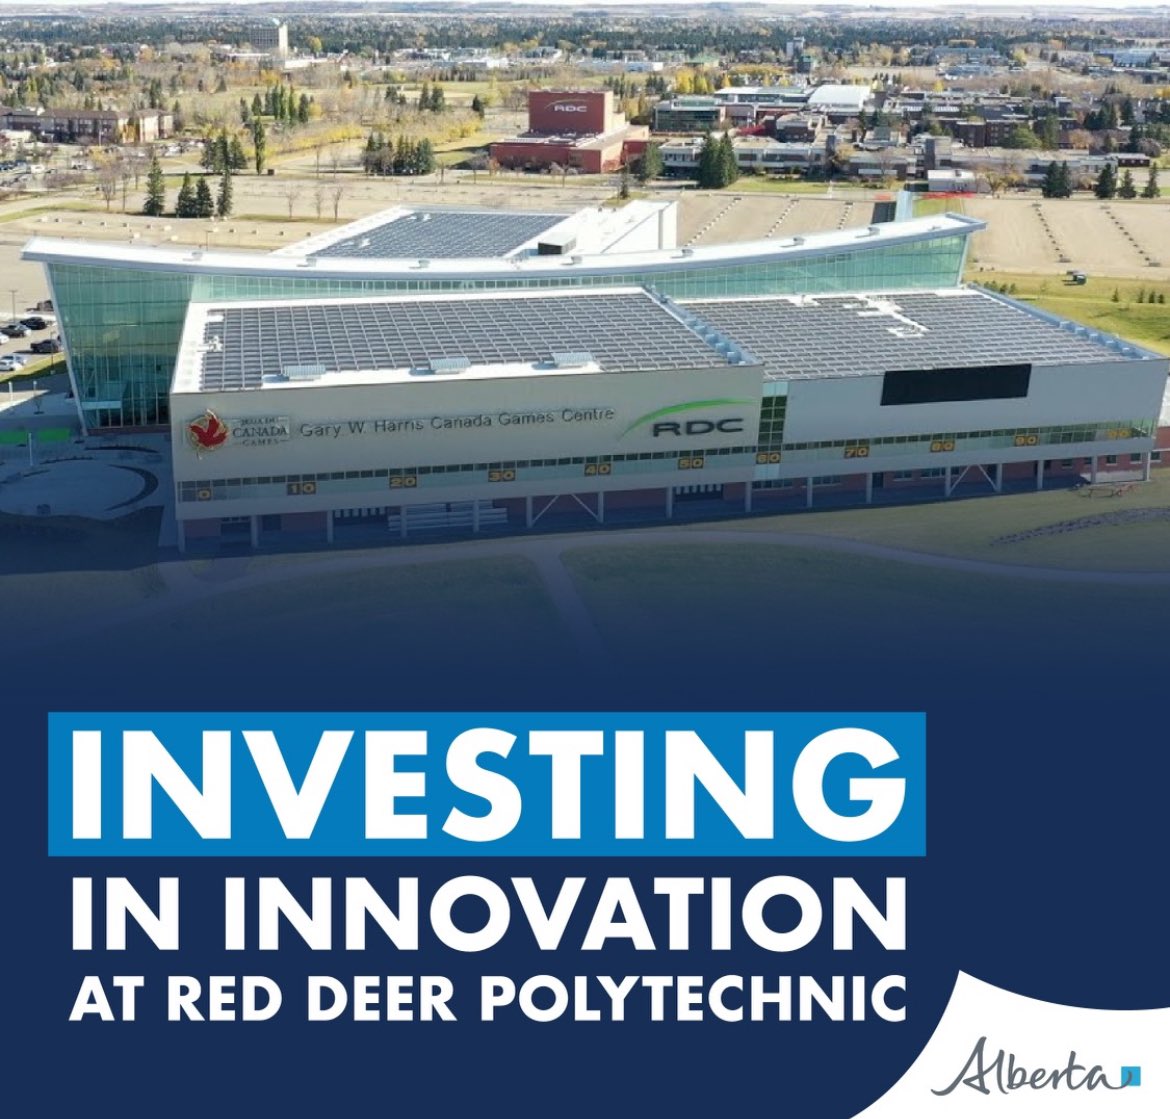 To support emerging opportunities for students, we are investing $12.9 million to expand the Centre for Innovation in Manufacturing Technology Access Centre (CIM-TAC) at Red Deer Polytechnic. CIM-TAC is an applied research and innovation centre that gives companies access to…